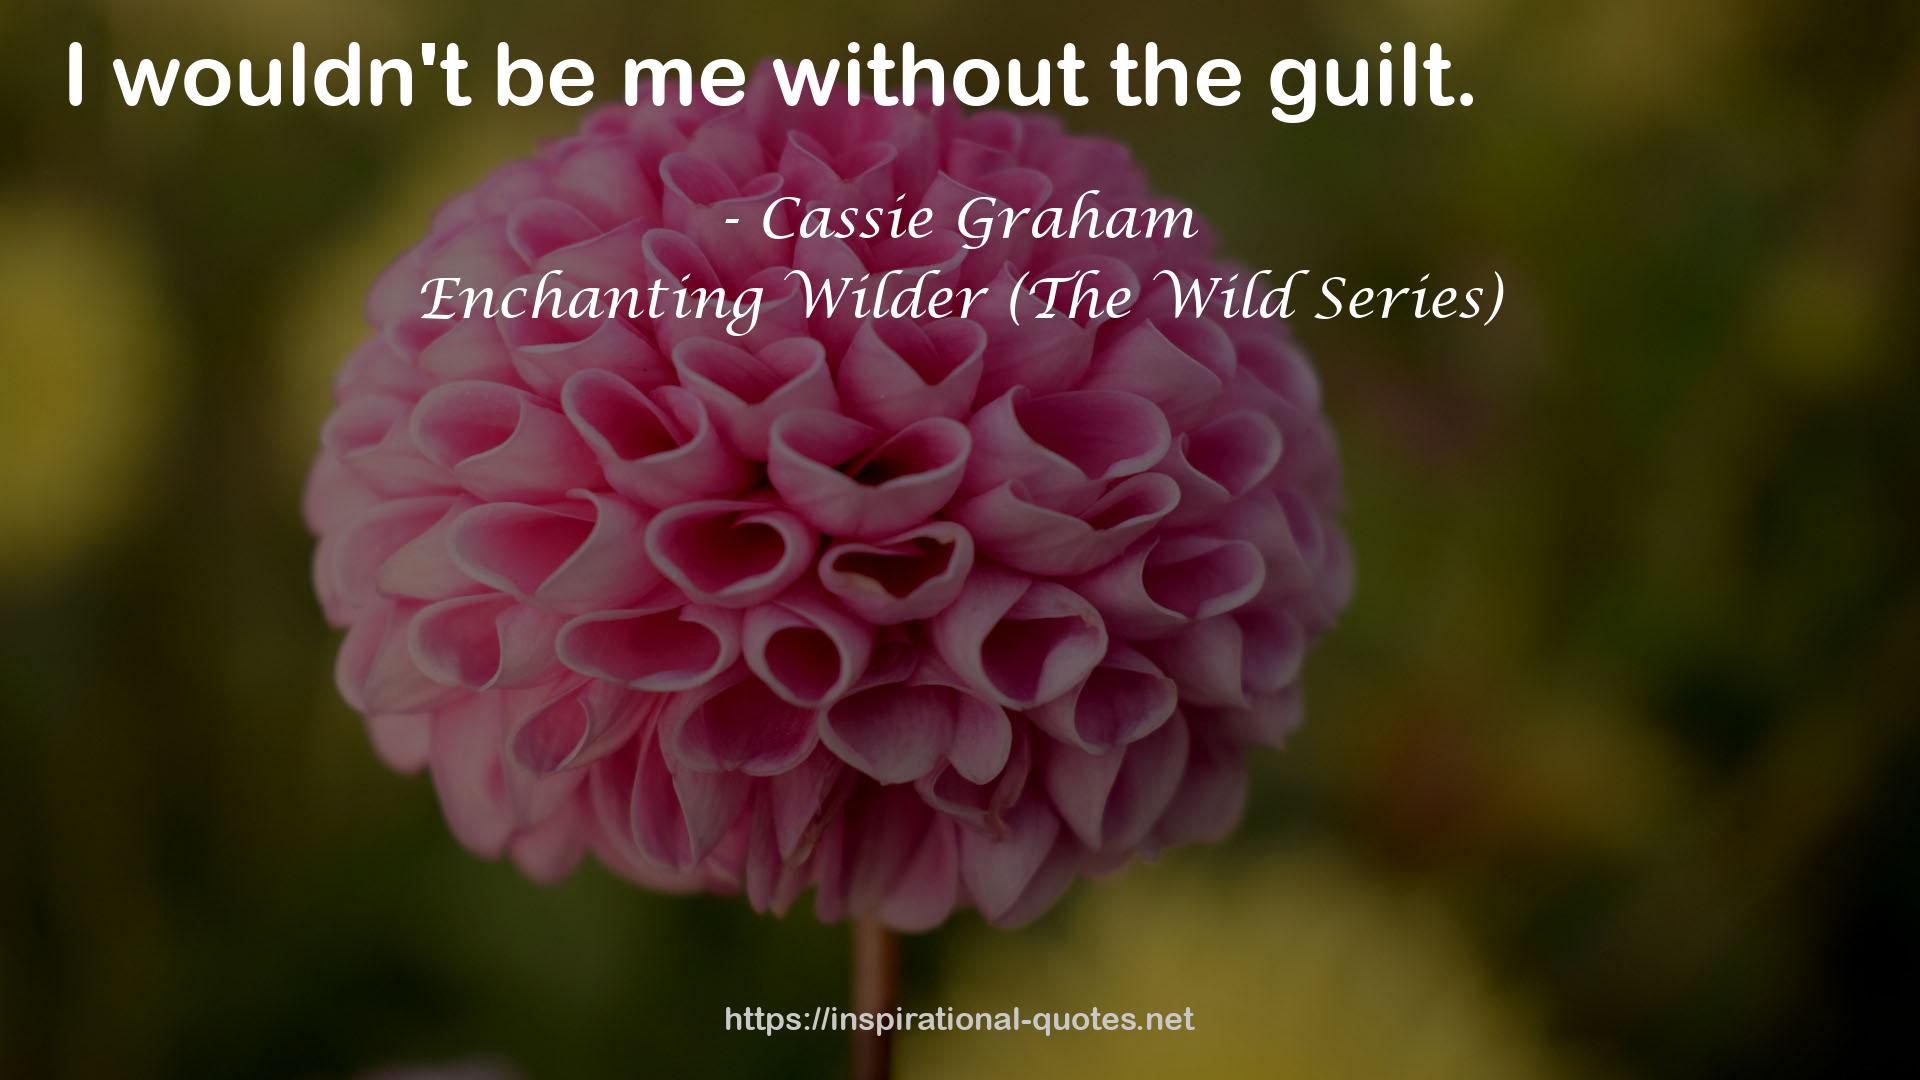 Enchanting Wilder (The Wild Series) QUOTES